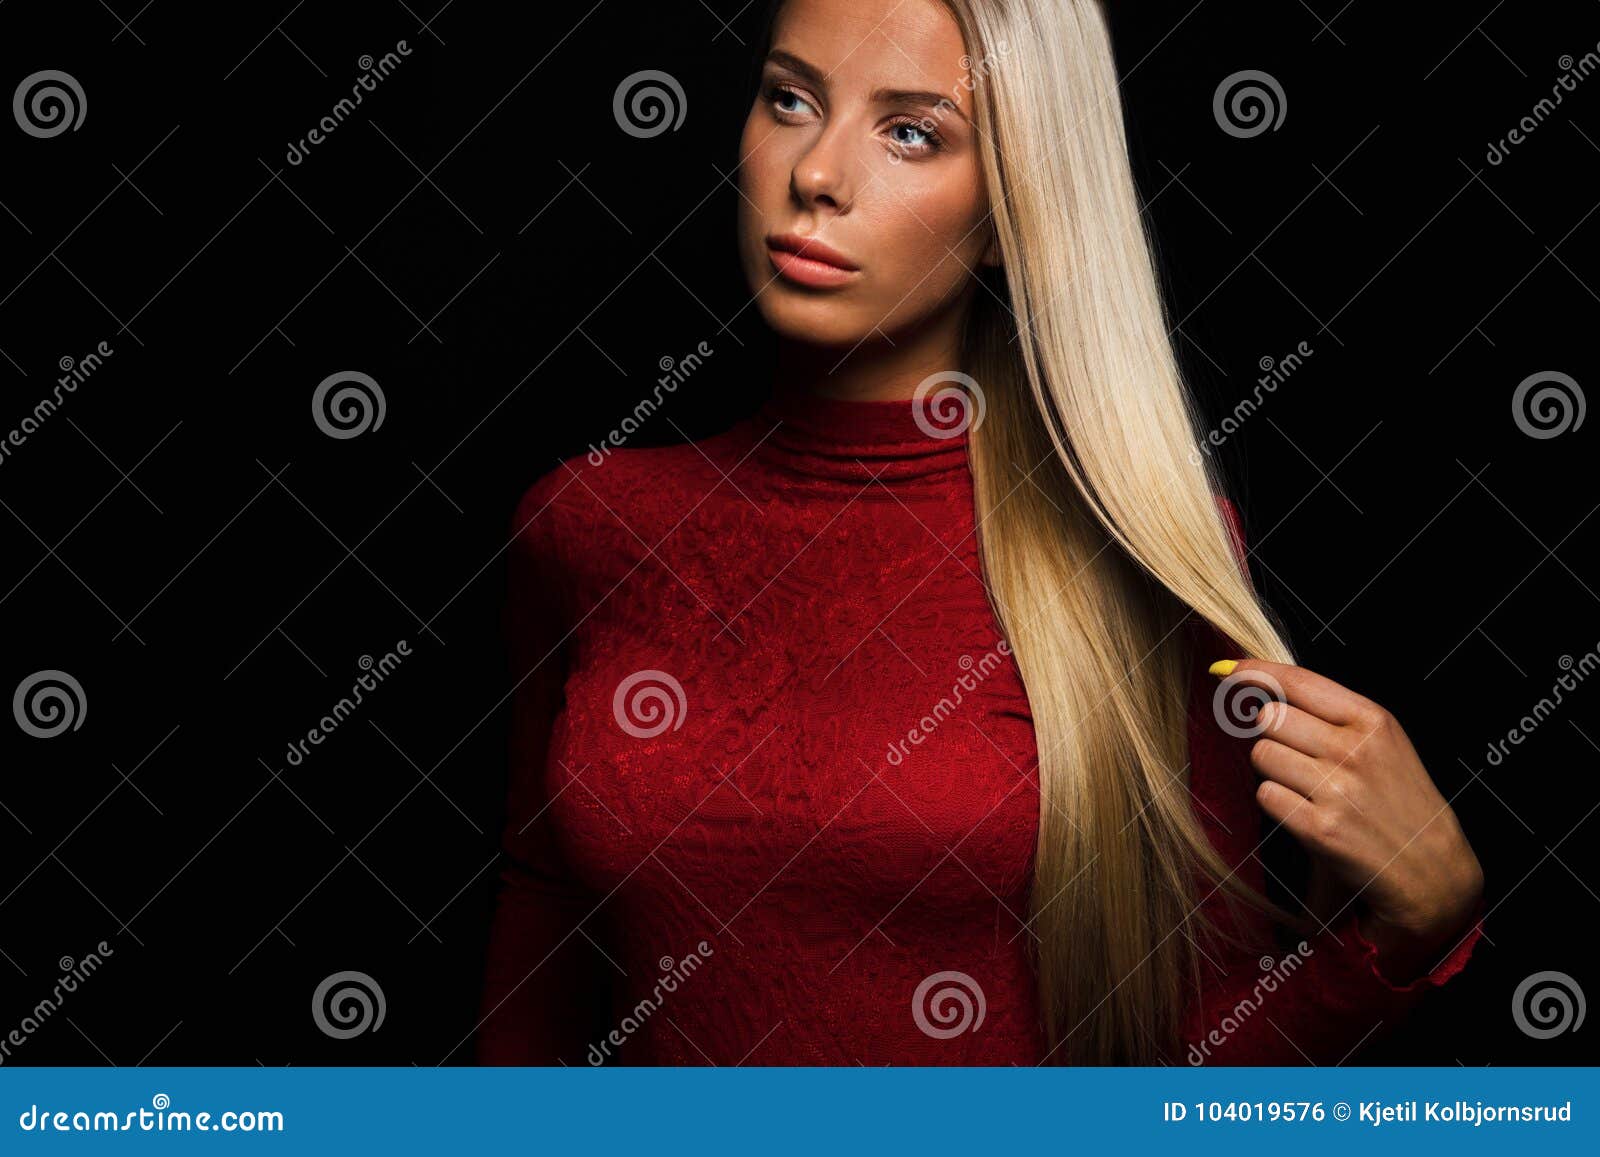 Dark Portrait Of A Beautiful Blonde Woman In Red Dress With Black